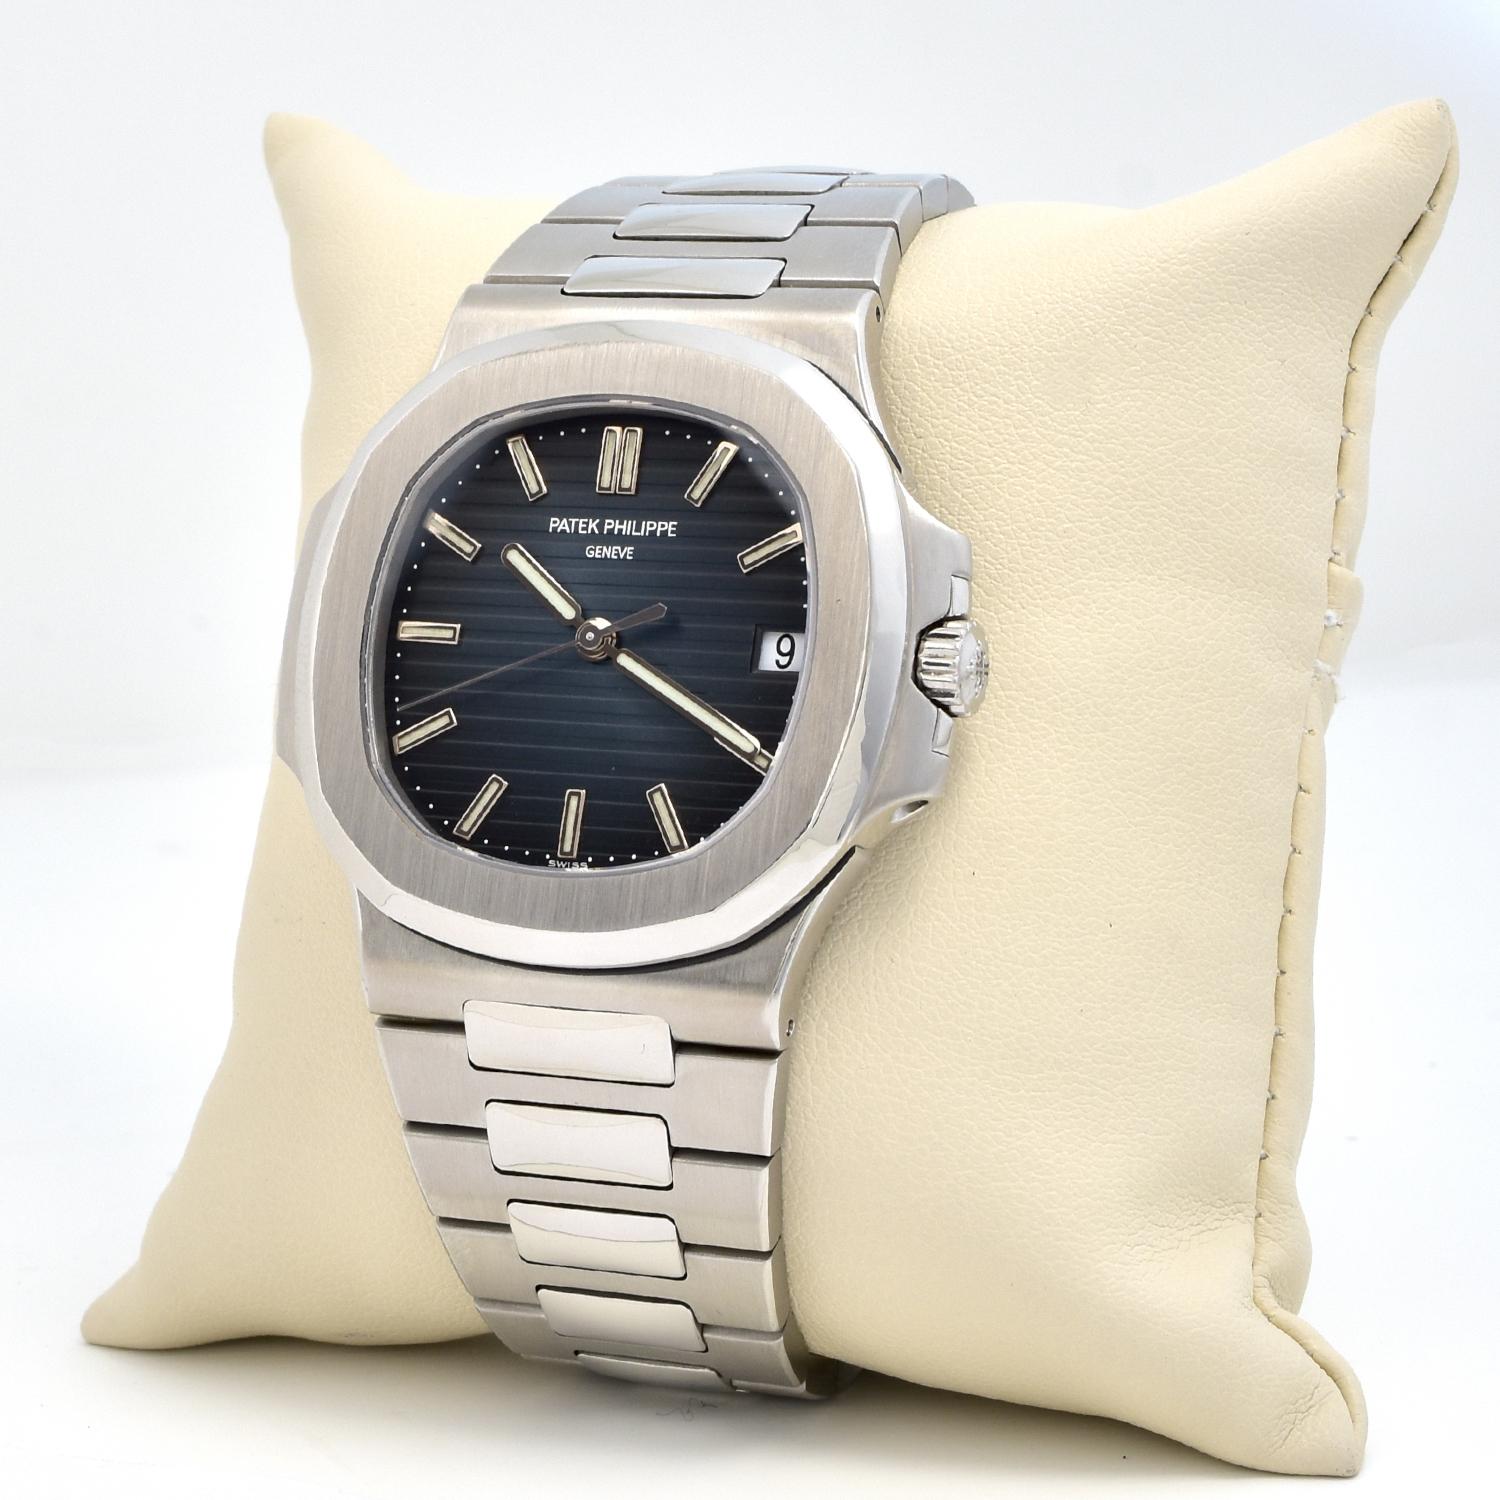 Hands down the most sought after and in-demand watch in the world. The Patek Philippe Nautilus 5711 cased in steel is short of a masterpiece. Designed to perfection fits slim on the wrist but commands and incredible presence. The bracelet is smooth